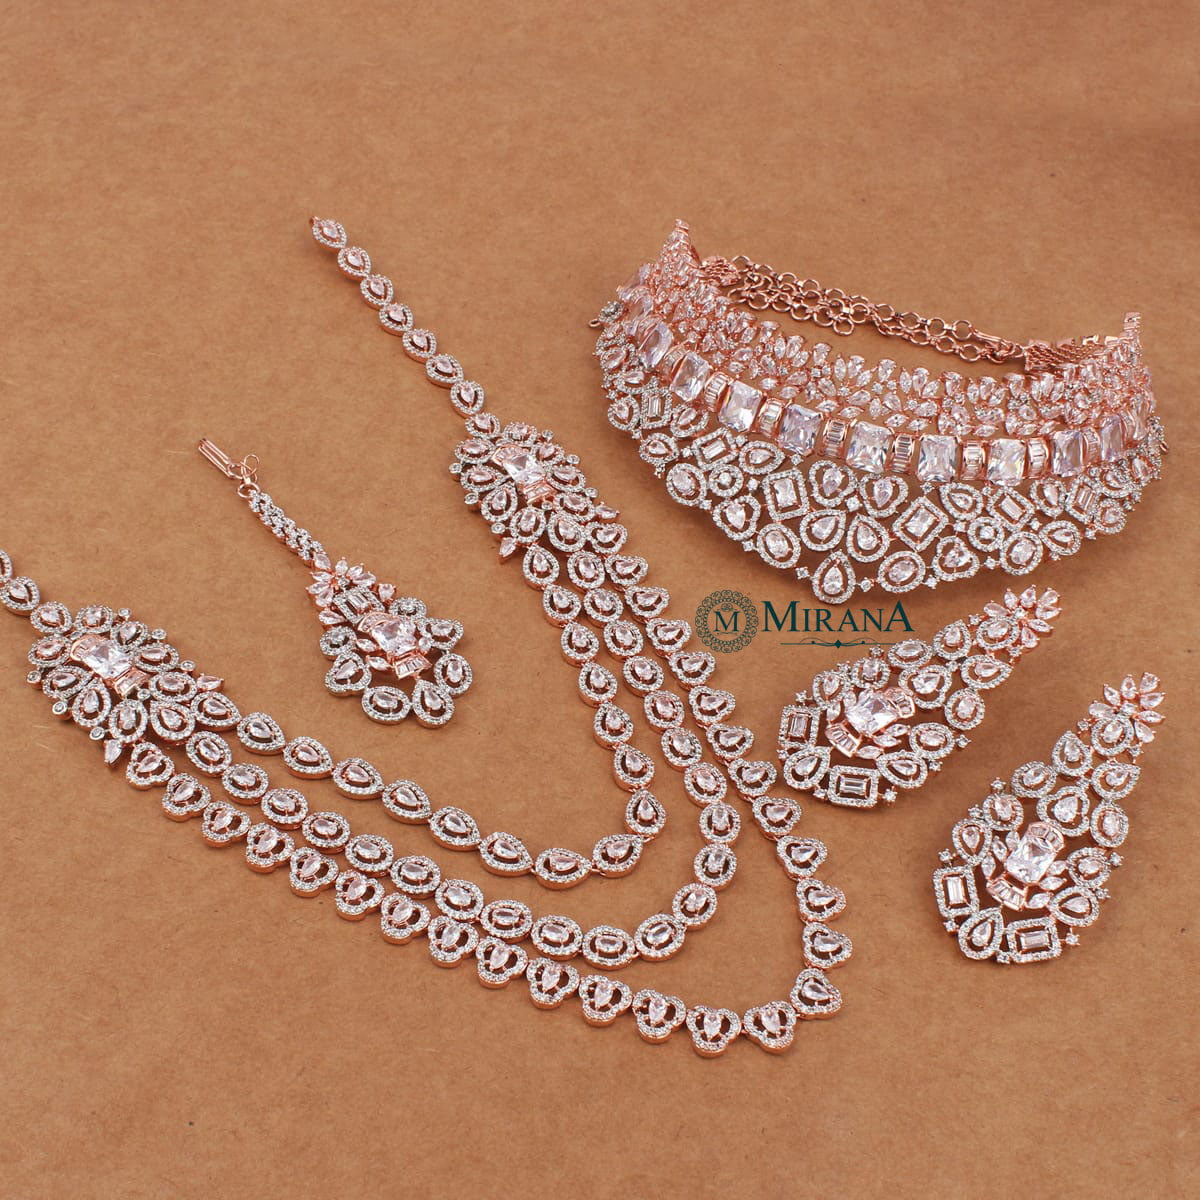 ADELIE Simulated Diamond Necklace and Earrings Set | EDEN LUXE Bridal